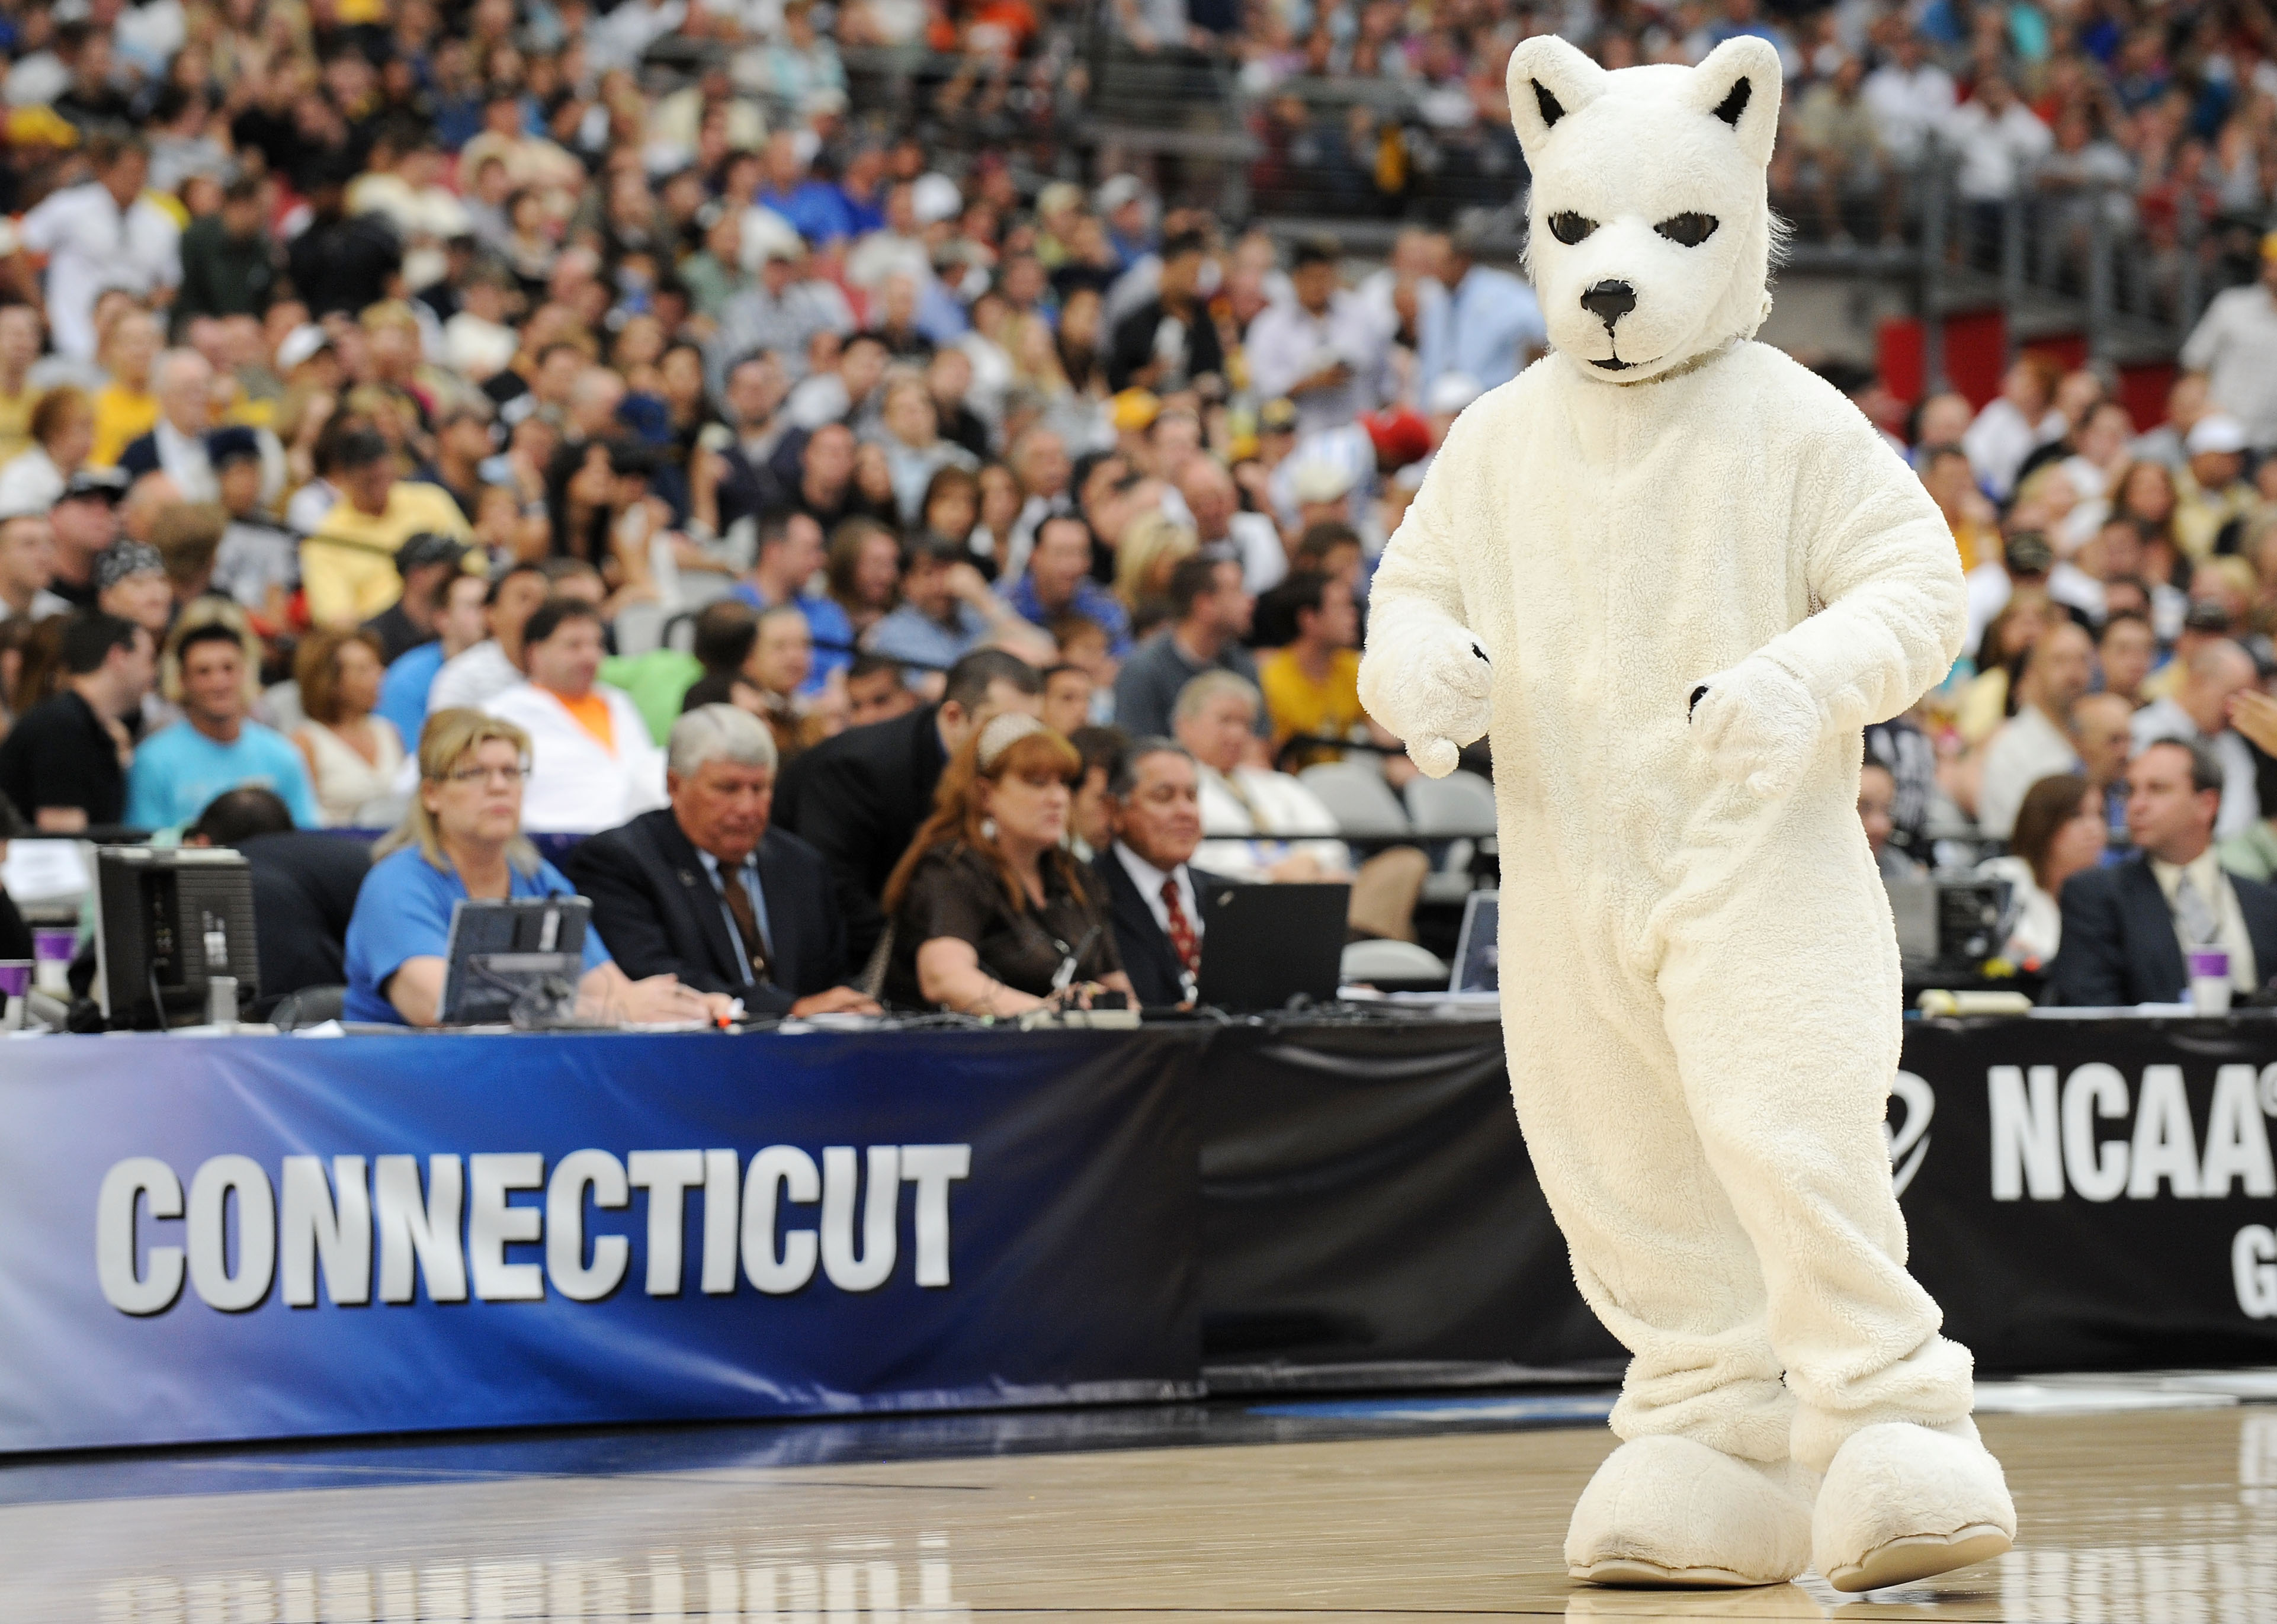 GLENDALE, AZ - MARCH 28:  The mascot of the Connecticut Huskies performs during the game against the Missouri Tigers in the Elite Eight of the NCAA Division I Men's Basketball Tournament at the University of Phoenix Stadium on March 28, 2009 in Glendale,